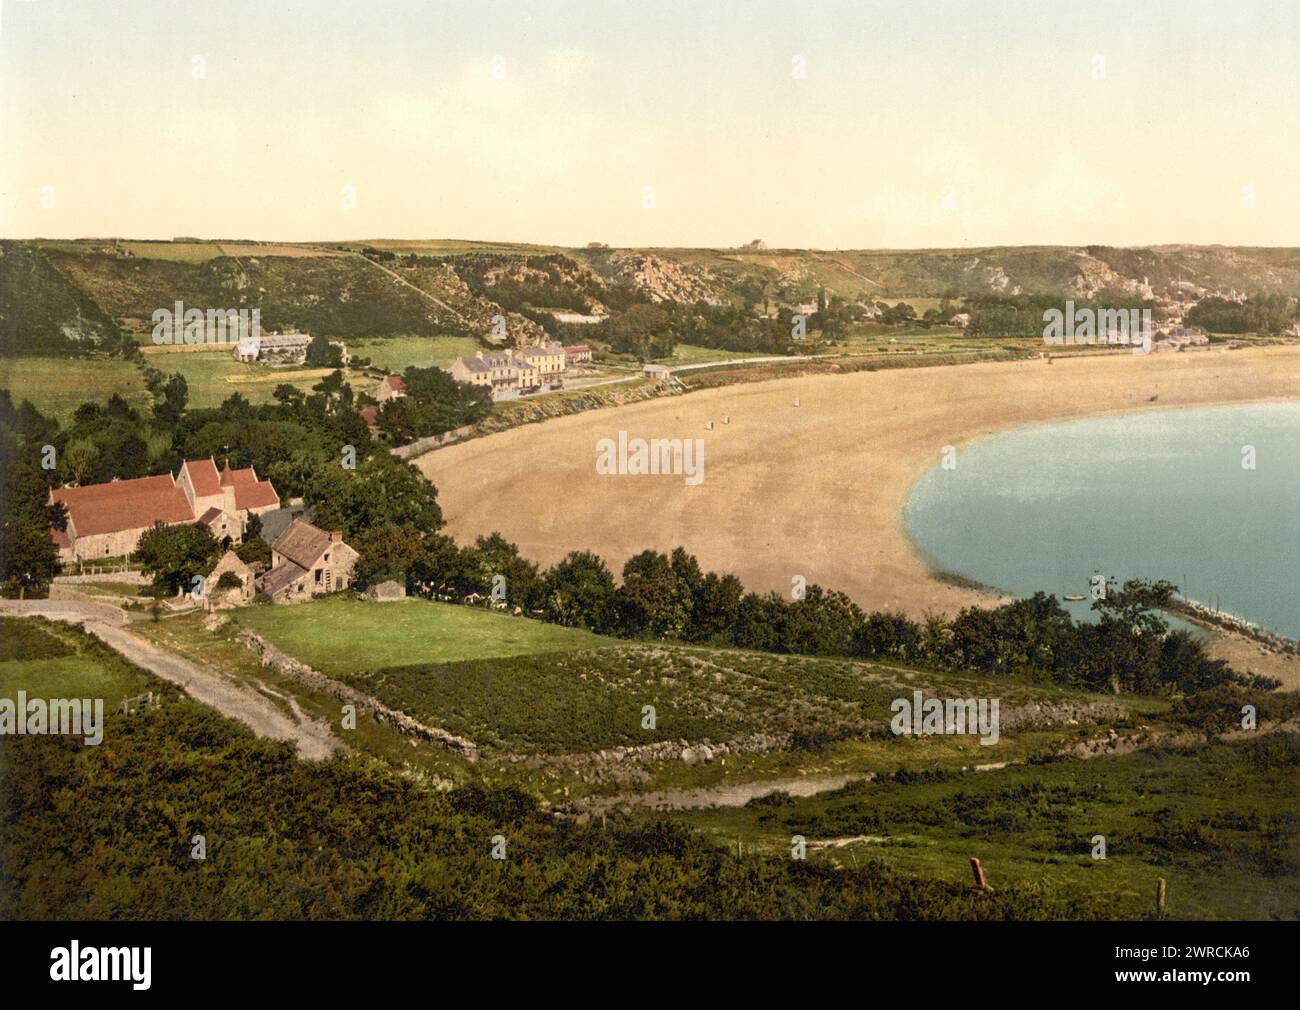 Jersey, Saint Brelades Bay, Isole del Canale, Inghilterra, tra ca. 1890 e ca. 1900., Channel Islands, Guernsey, Color, 1890-1900 Foto Stock